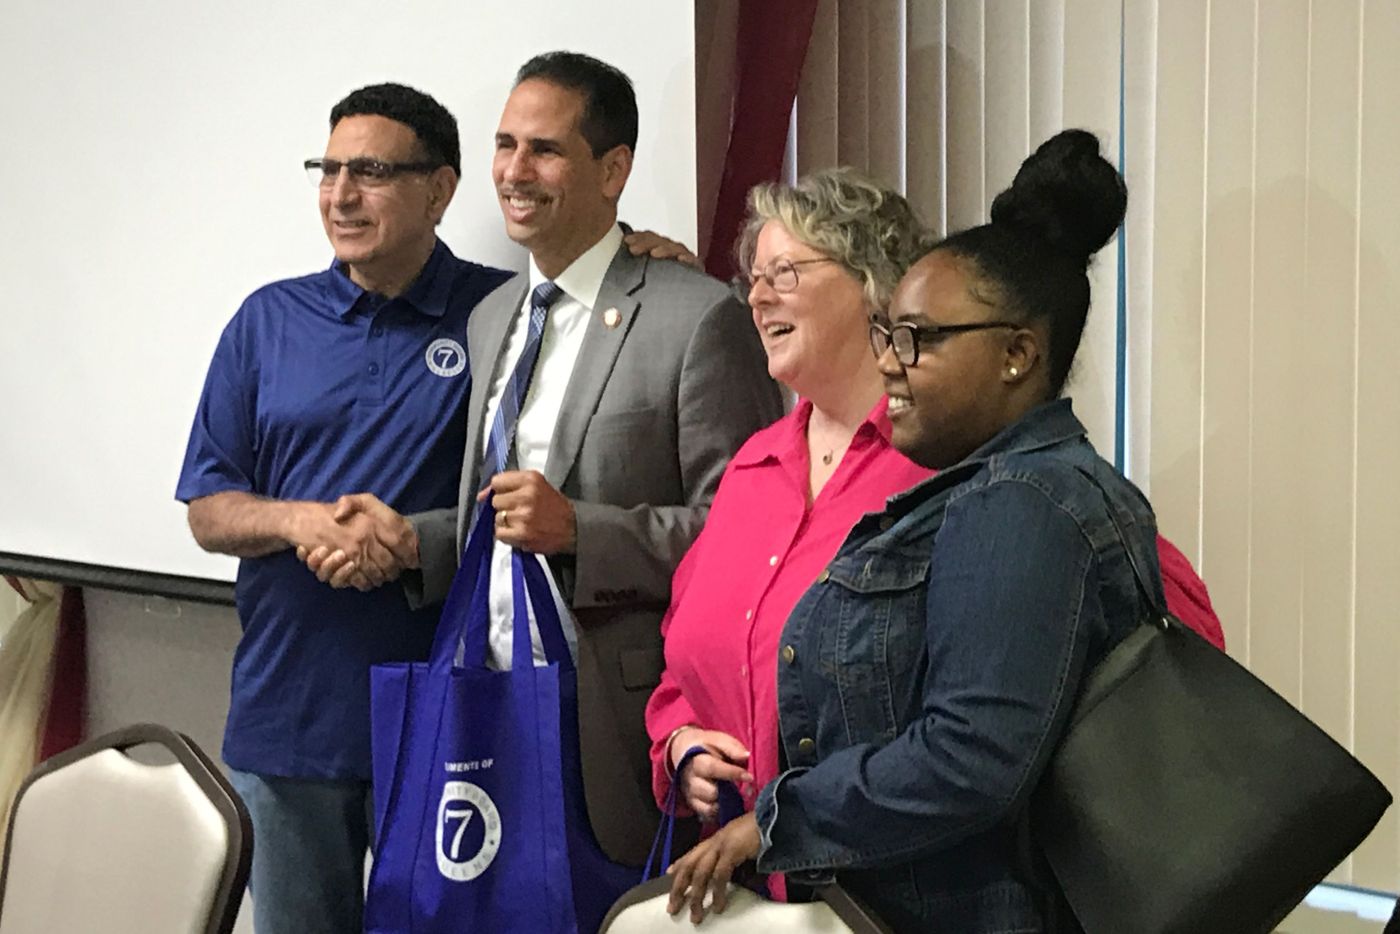 City Councilmember Fernando Cabrera (D-Bronx) holds one of 5,000 tote bags Queens Community Board 7 purchased with public funds, June 17, 2019.